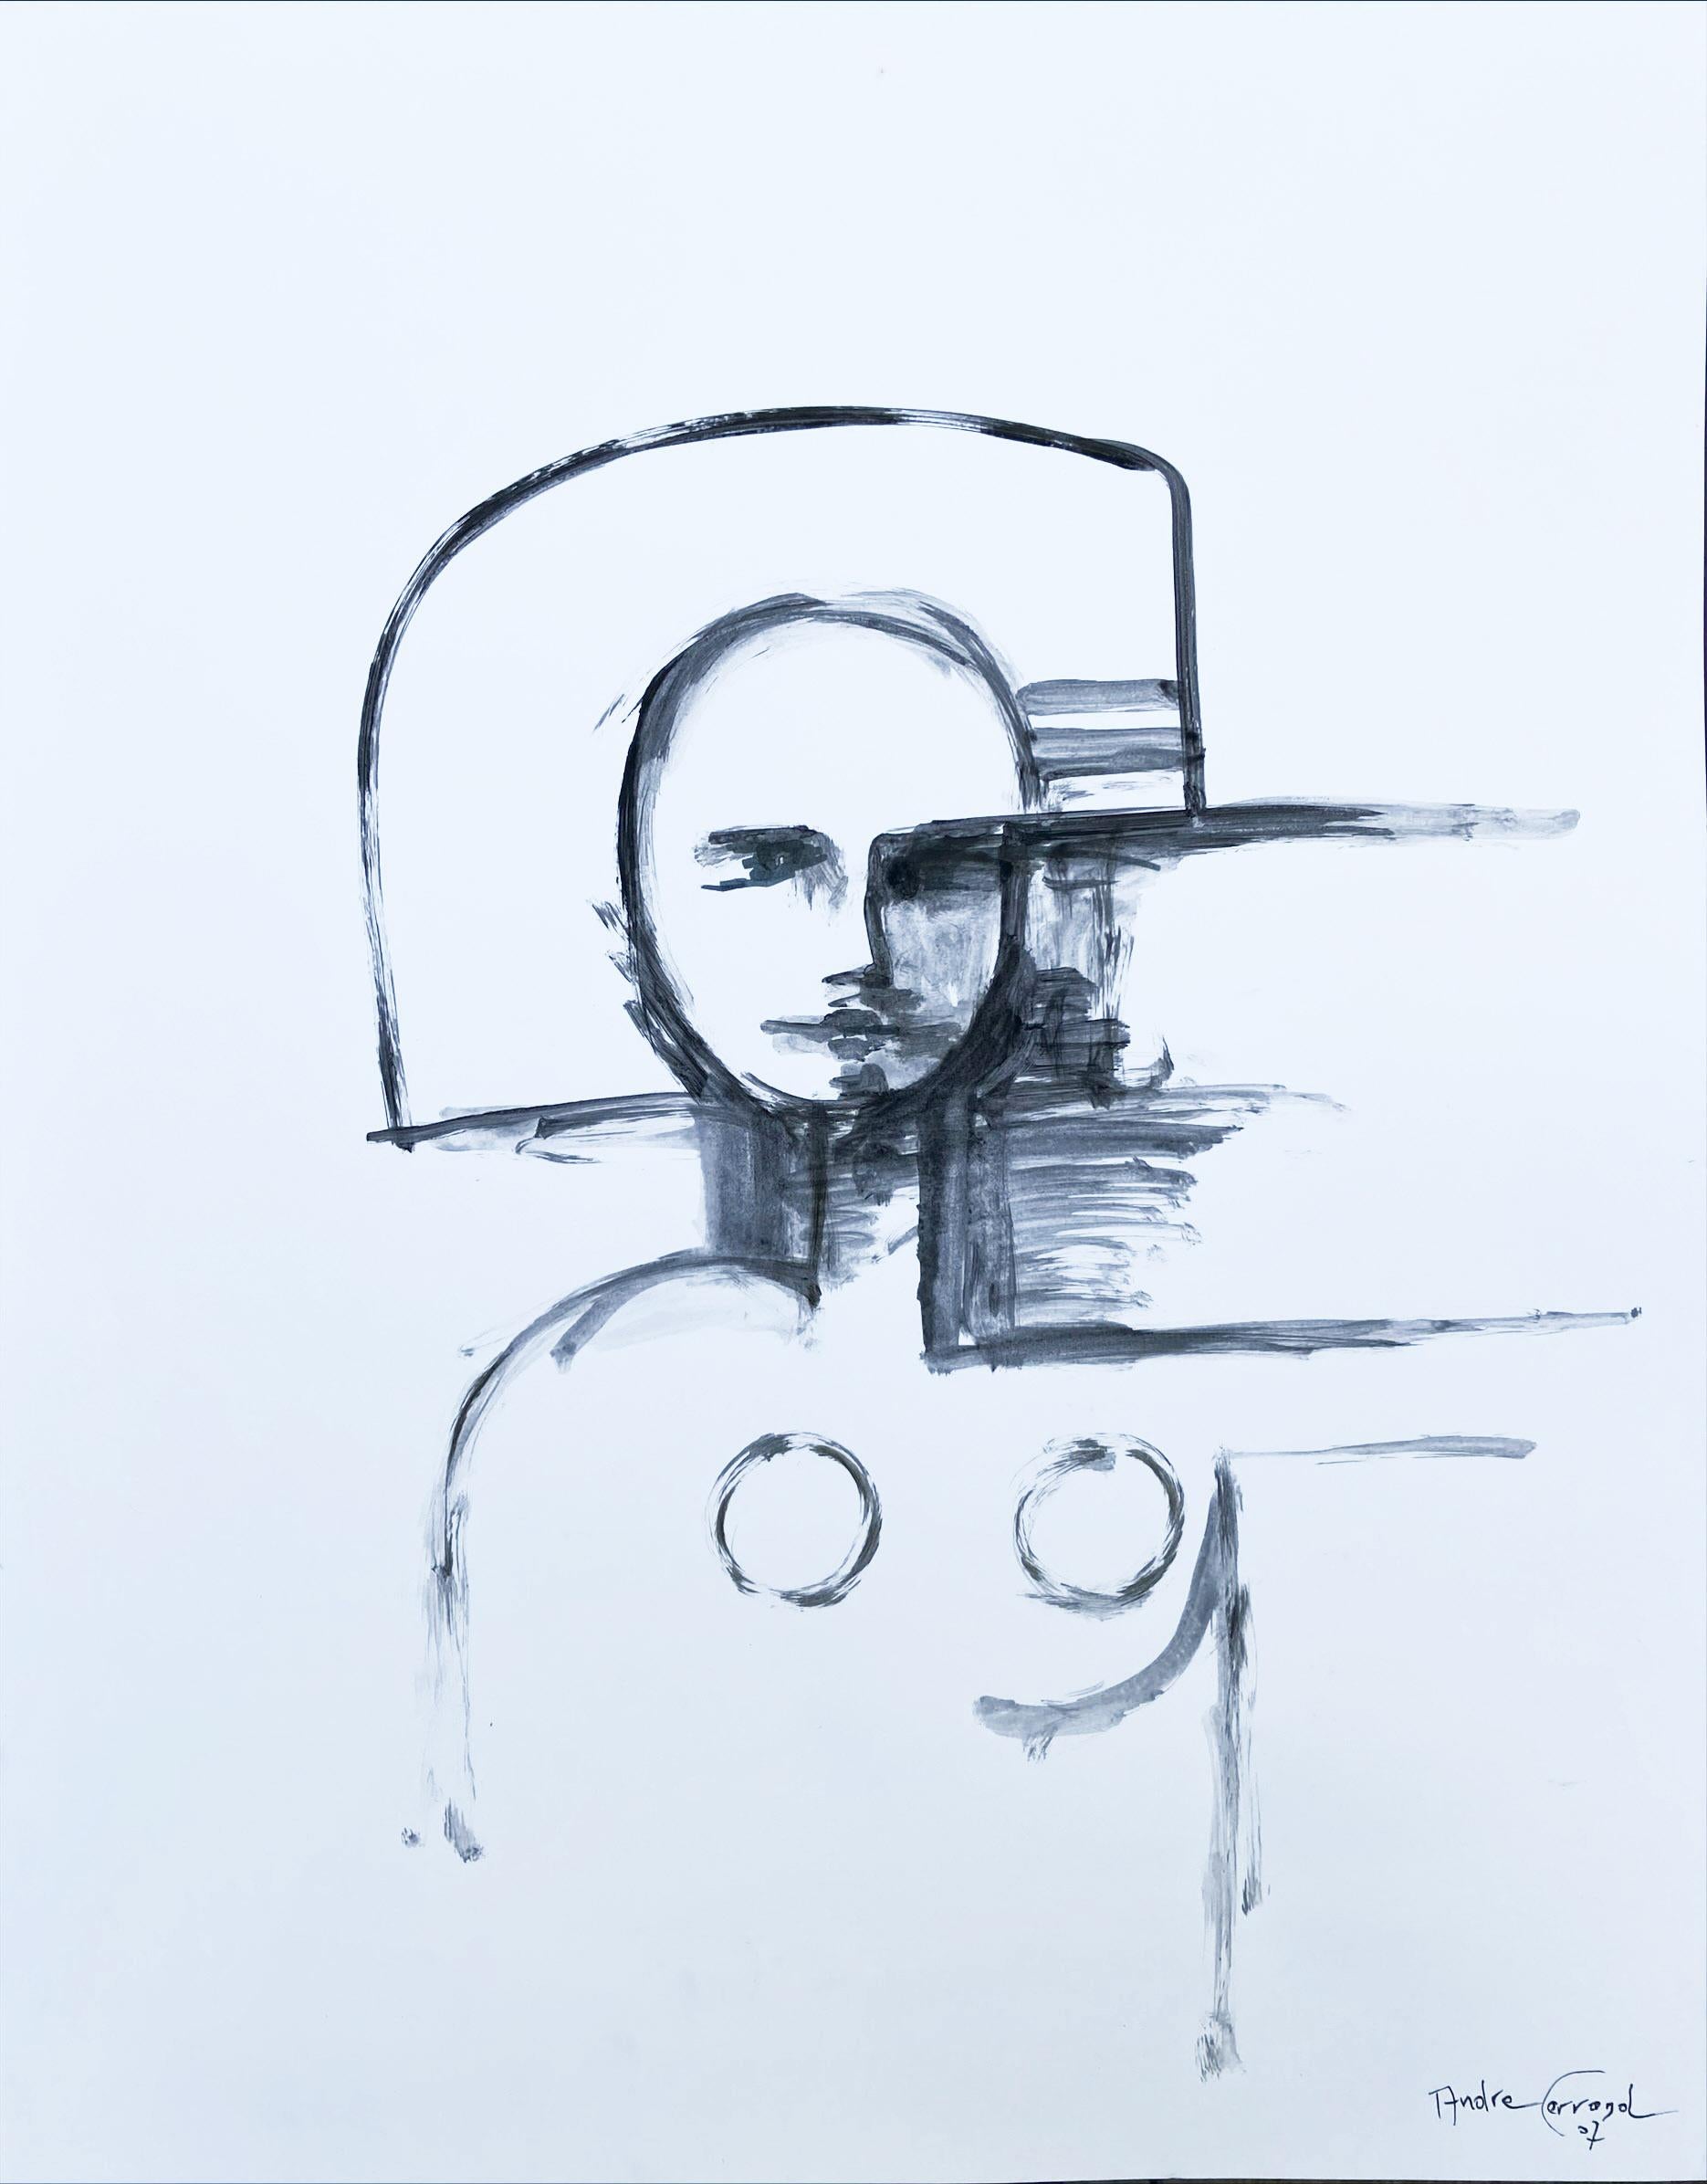 André Ferrand - Portrait 1
51x65
India ink on paper 
Signed on the back 
Circa 2007
390€